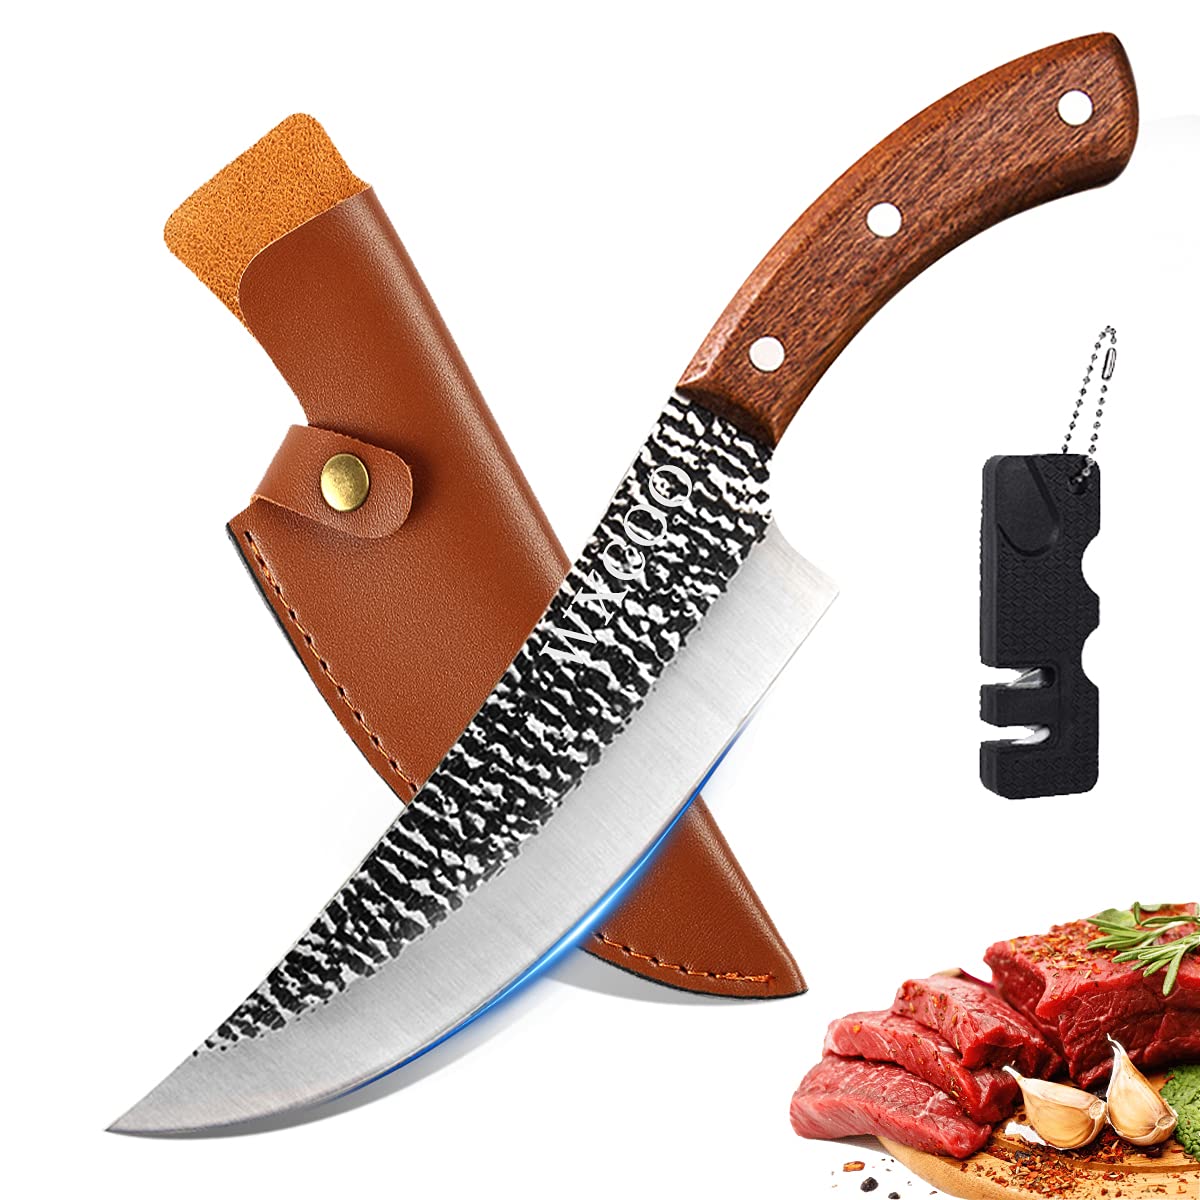 WXCOO 7-Inch Chef Knife Hand Forged Cleaver Knife High Carbon Stainless Steel, Boning knives Chef Butcher Knife with Sheath & Pocket Sharpener for Kitchen, Camping, Home, Outdoor, BBQ